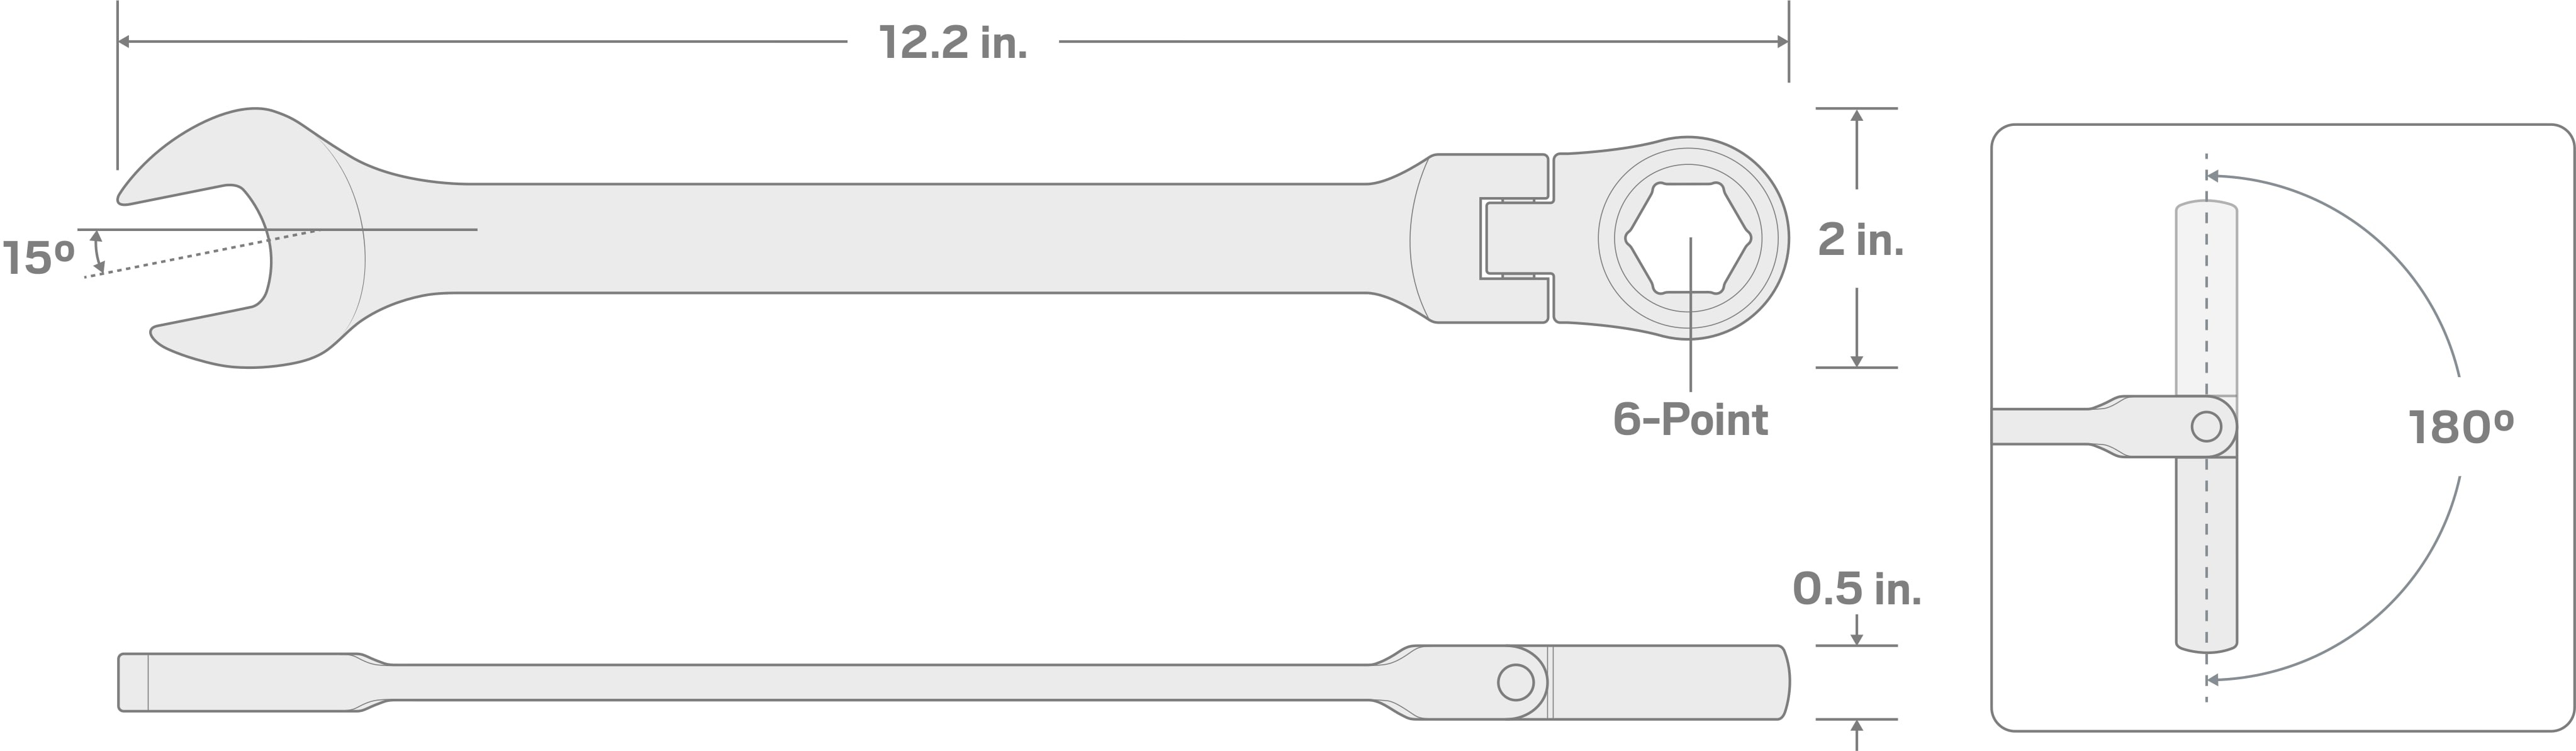 Specs for 1 Inch Flex Ratcheting Combination Wrench